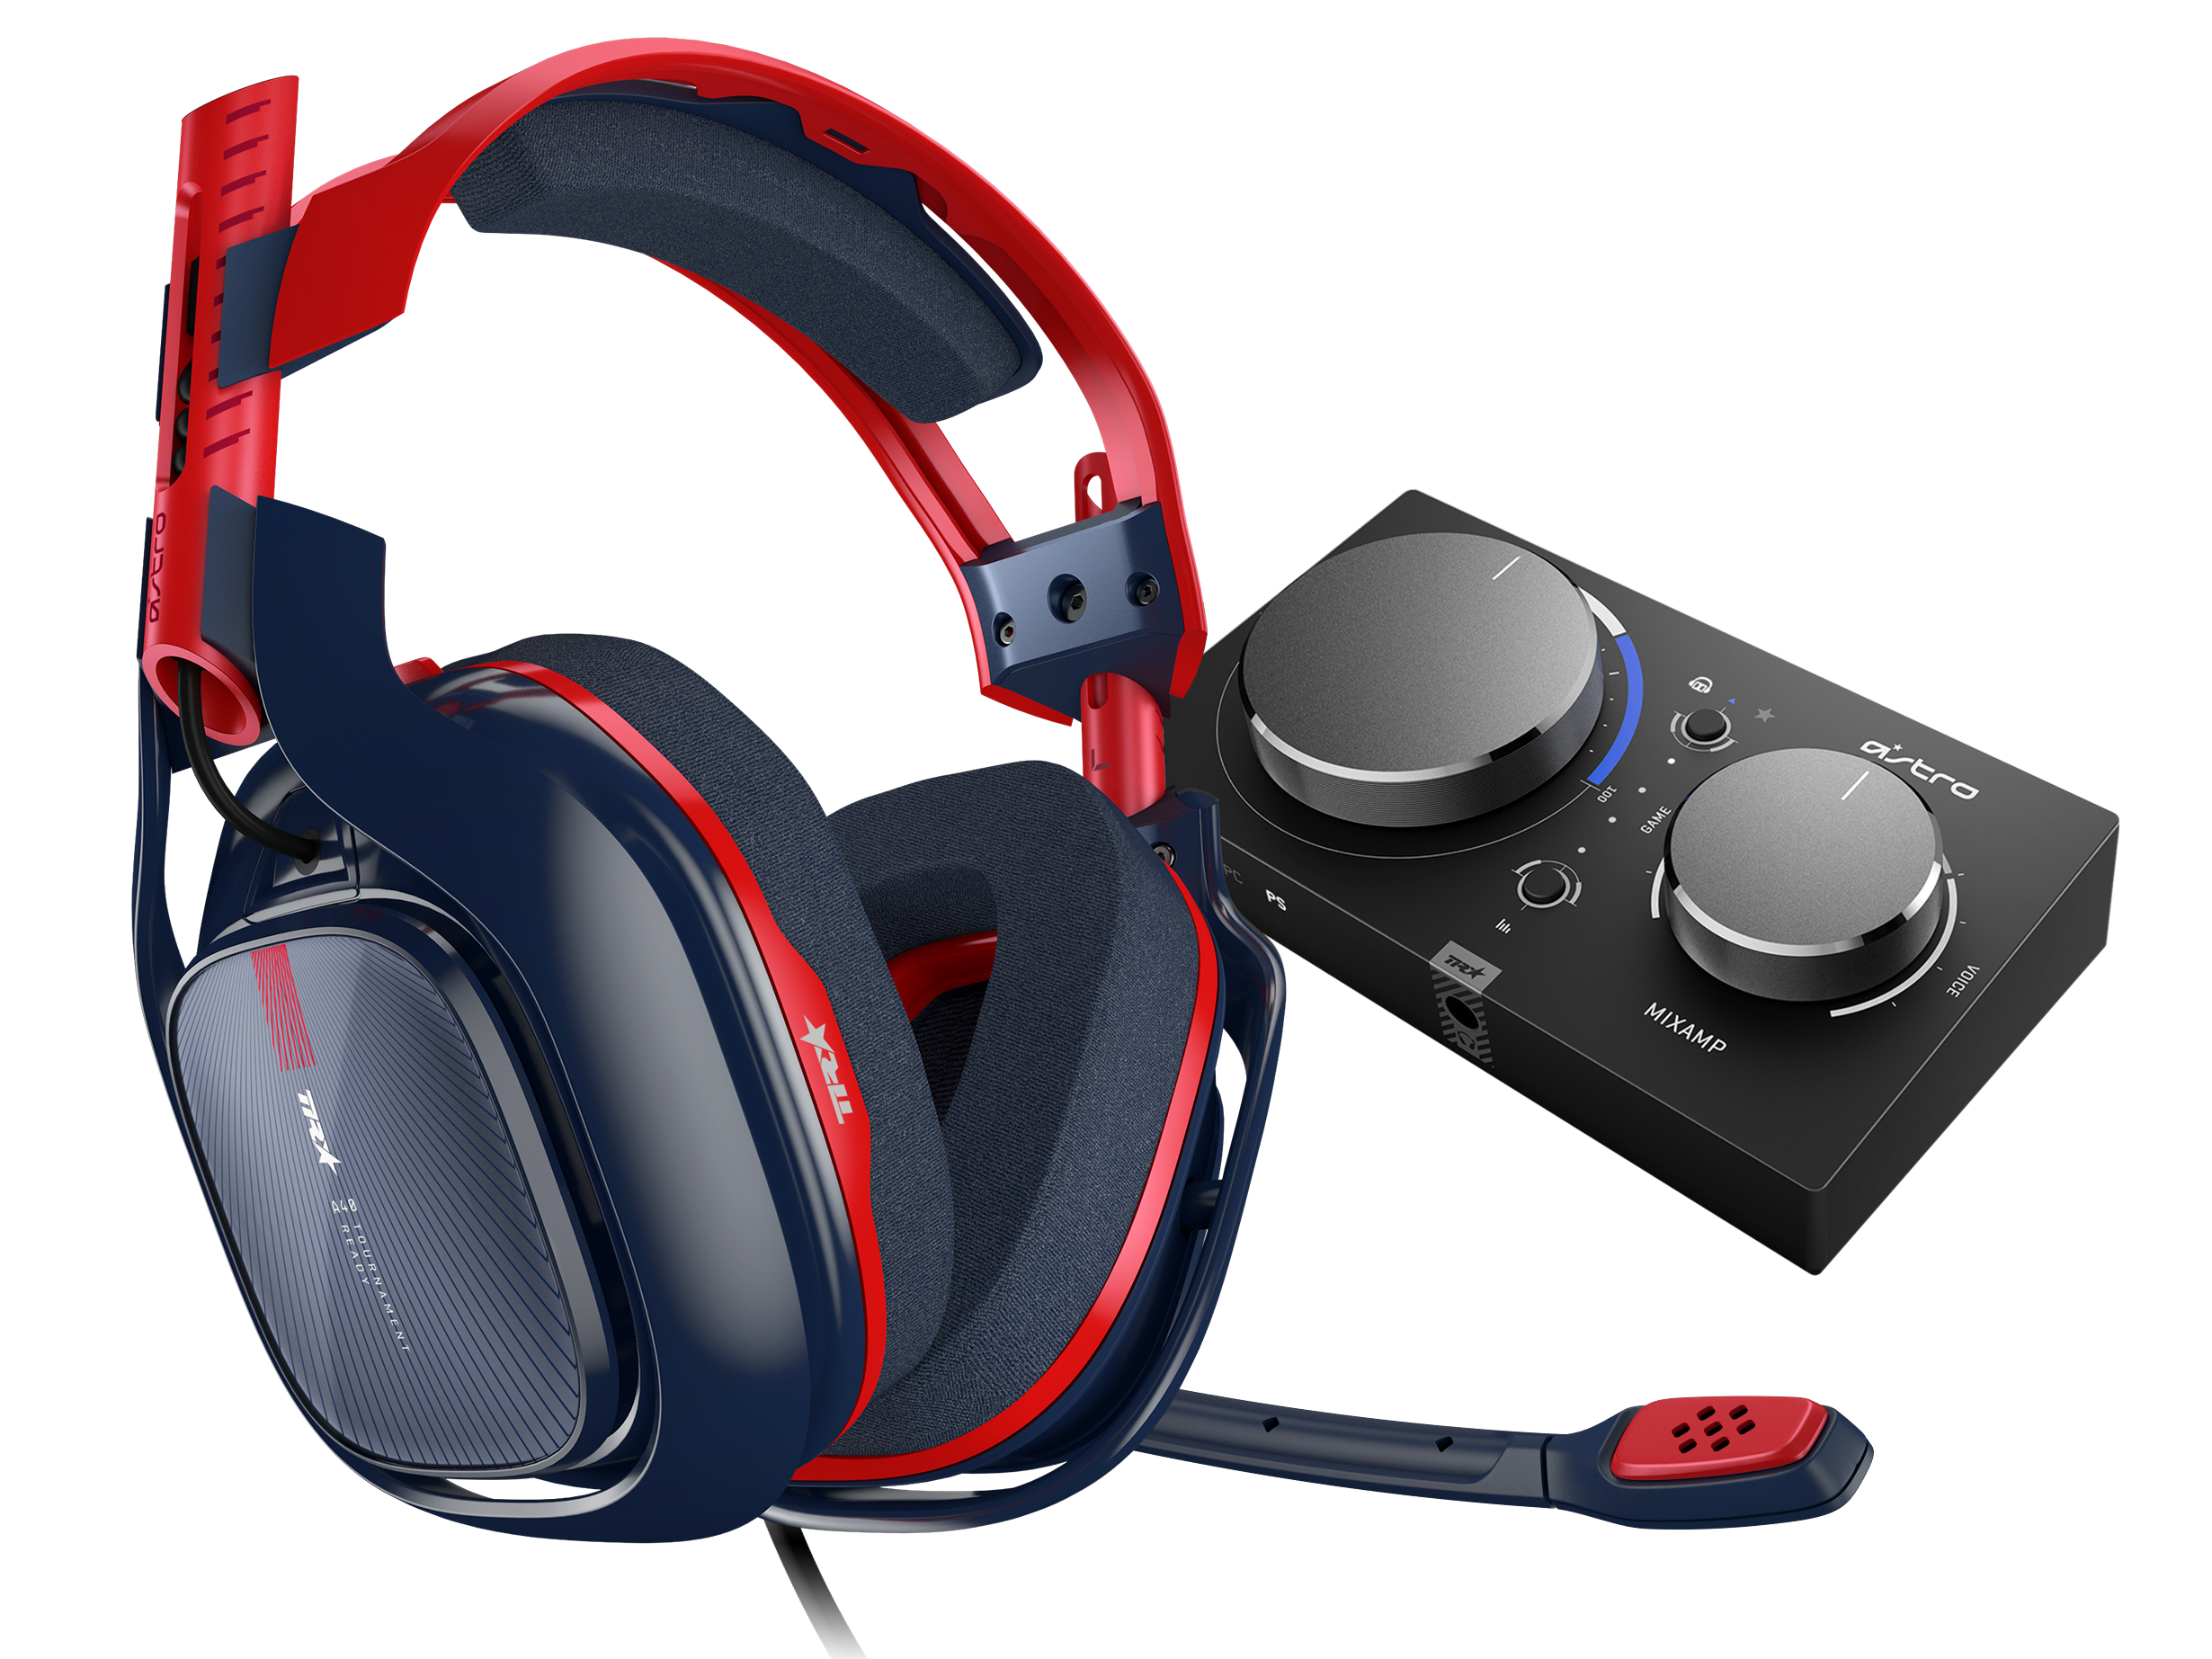 Astro A40 TR with MixAmp review: Elevate your audio game on Xbox and PC